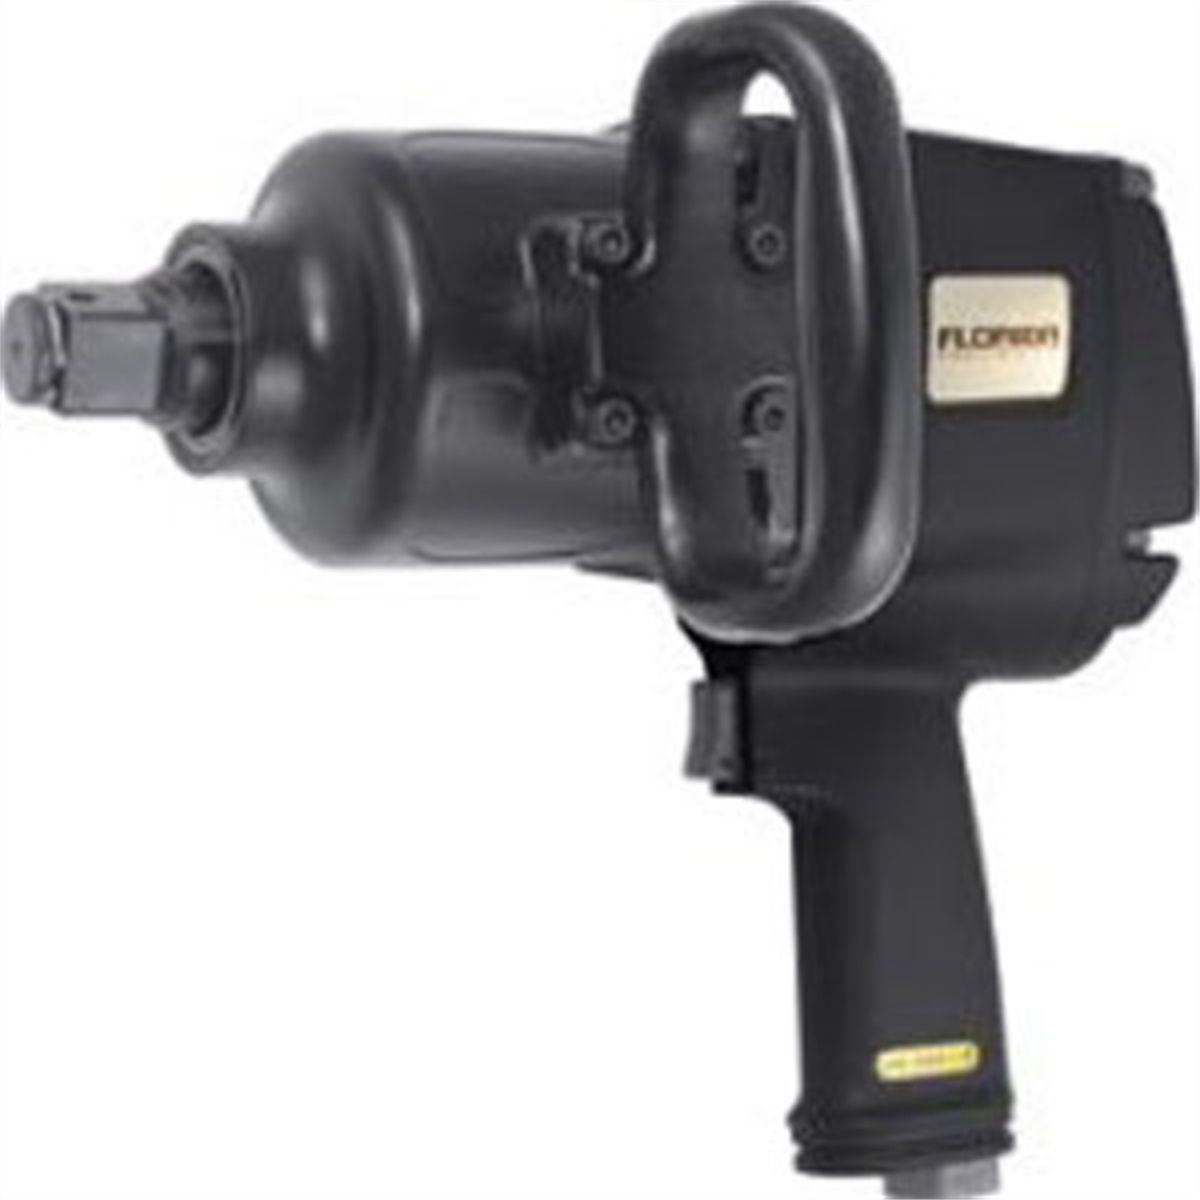 1 Inch Super Duty Pistol Impact Wrench 1,900 ft-lbs